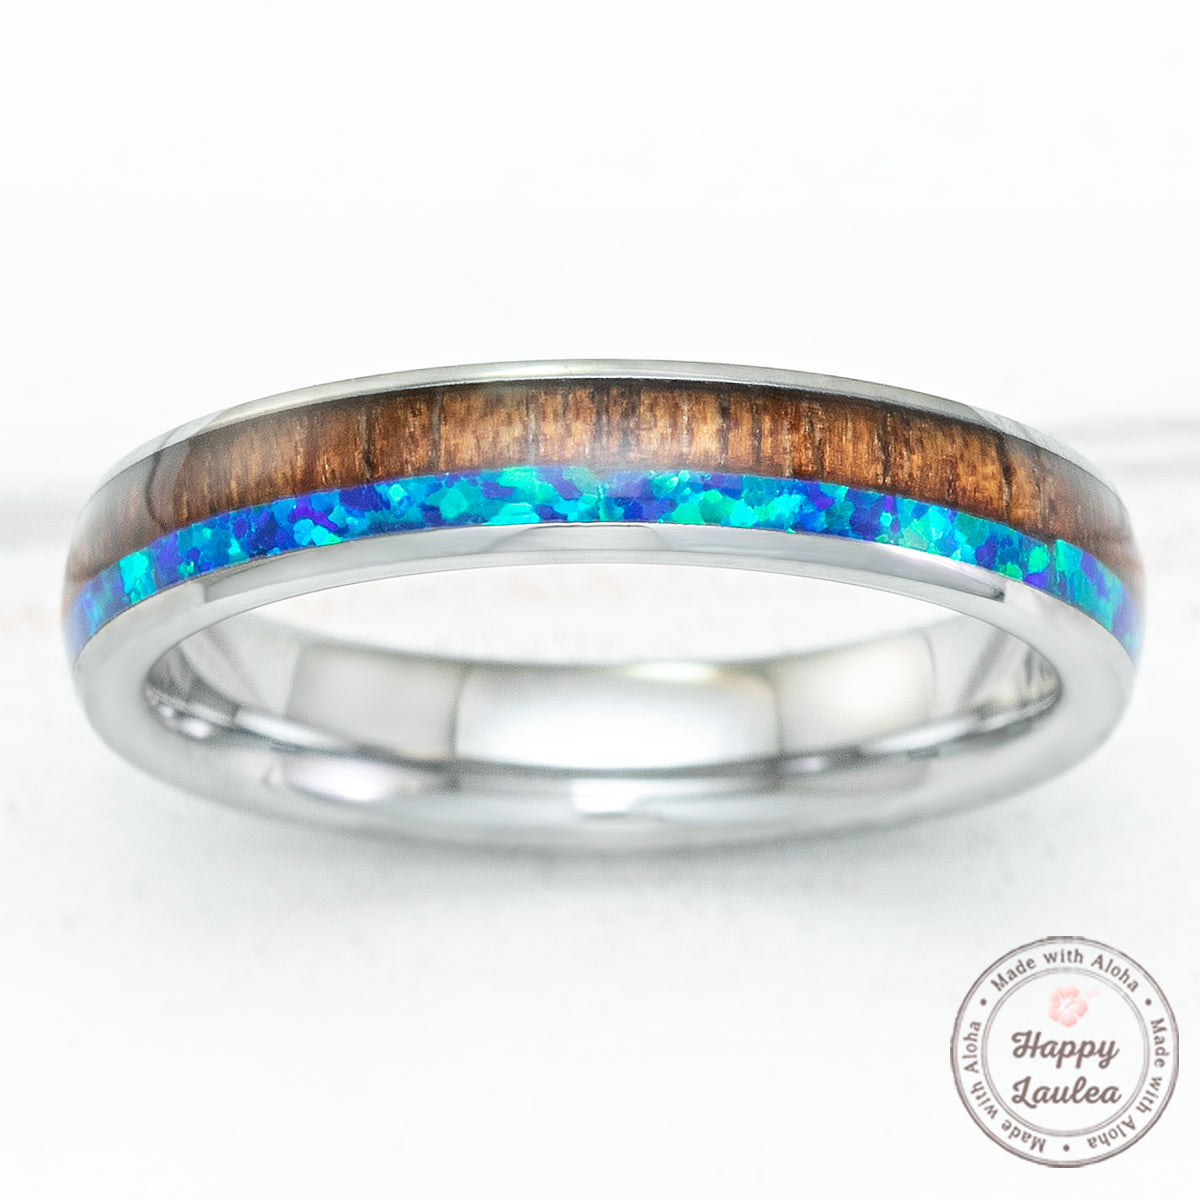 Tungsten Carbide 4mm Ring with Blue Opal & Koa Wood Duo-Inlay - Dome Shape, Comfort Fitment